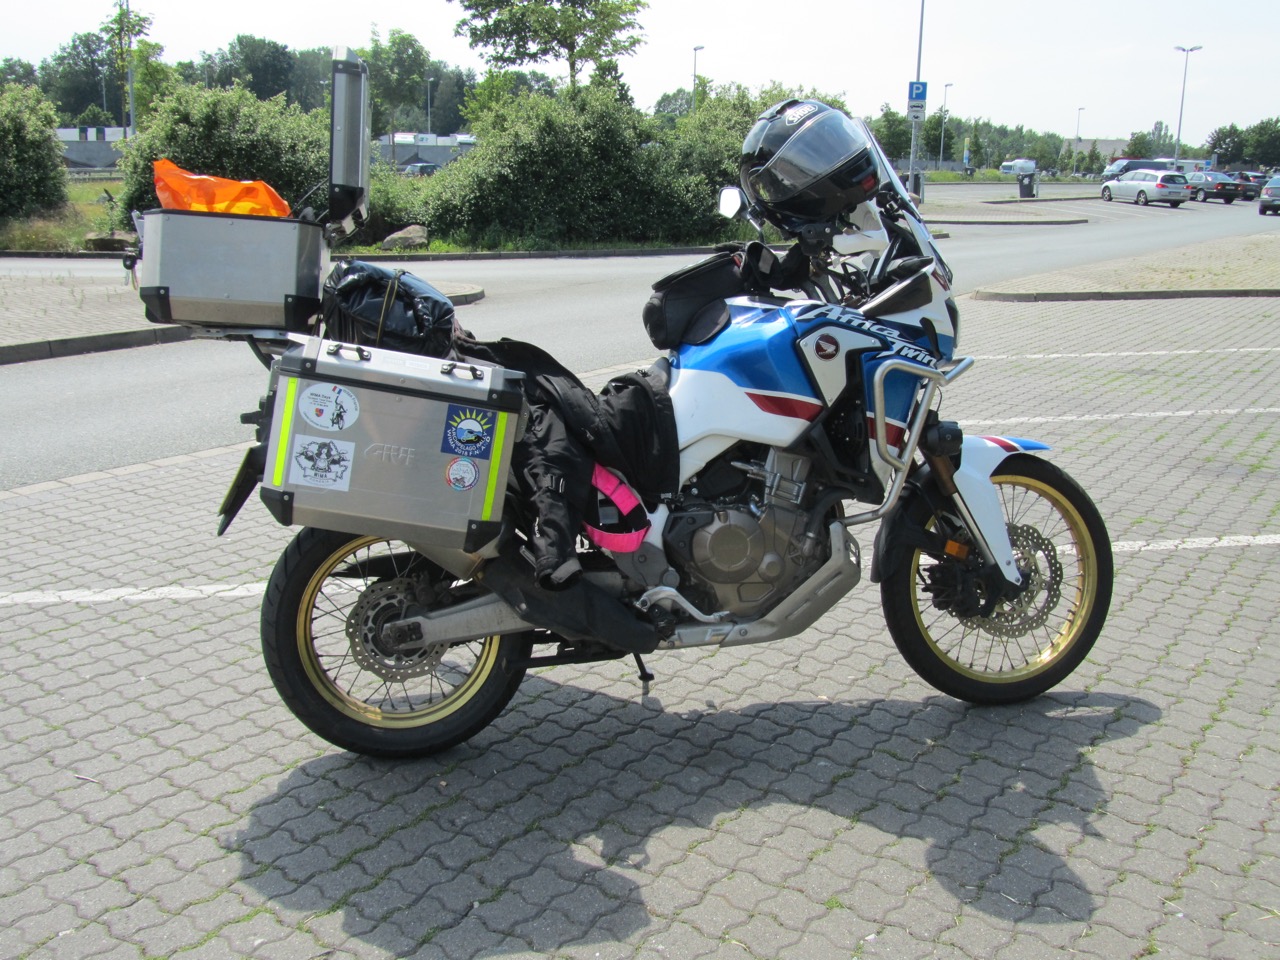 Netherlands - My bike, Alicia Twining, looked after me all the way